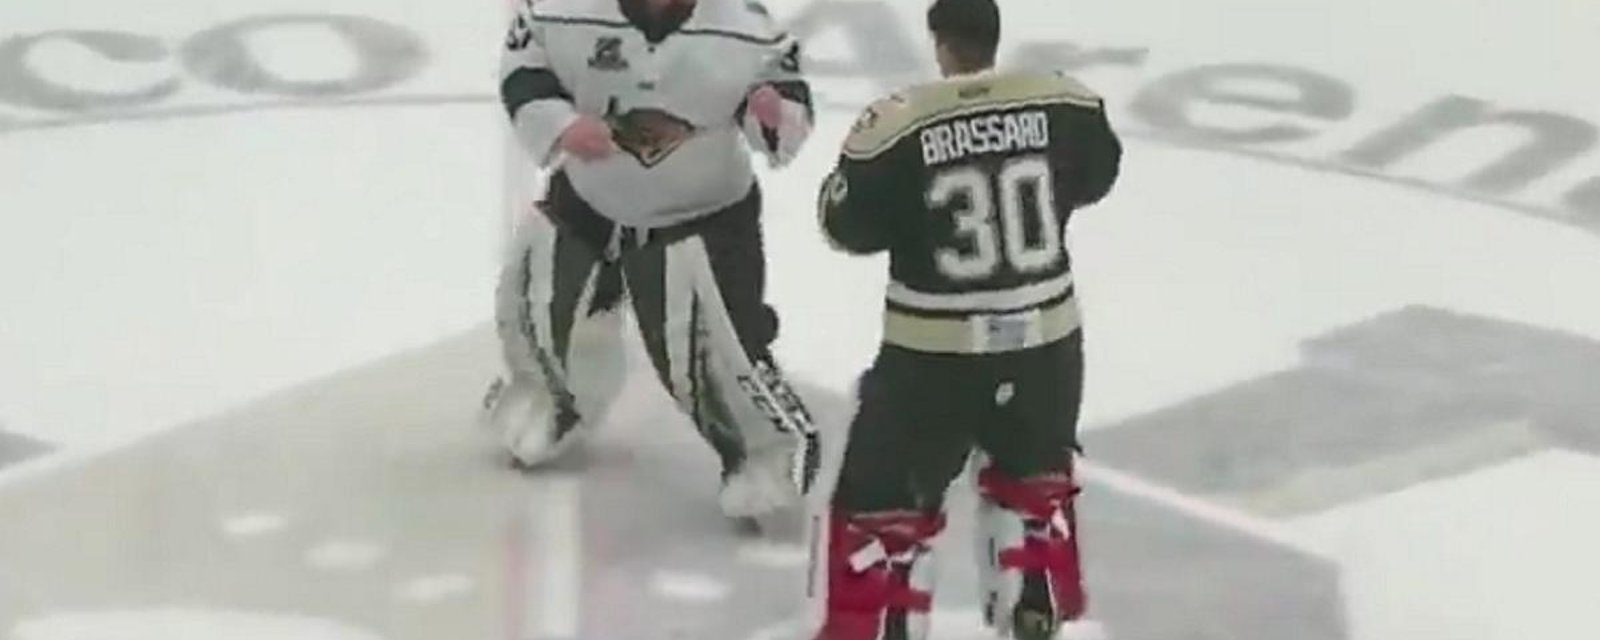 Goalie fight breaks out at center ice after a crazy brawl in the ECHL!